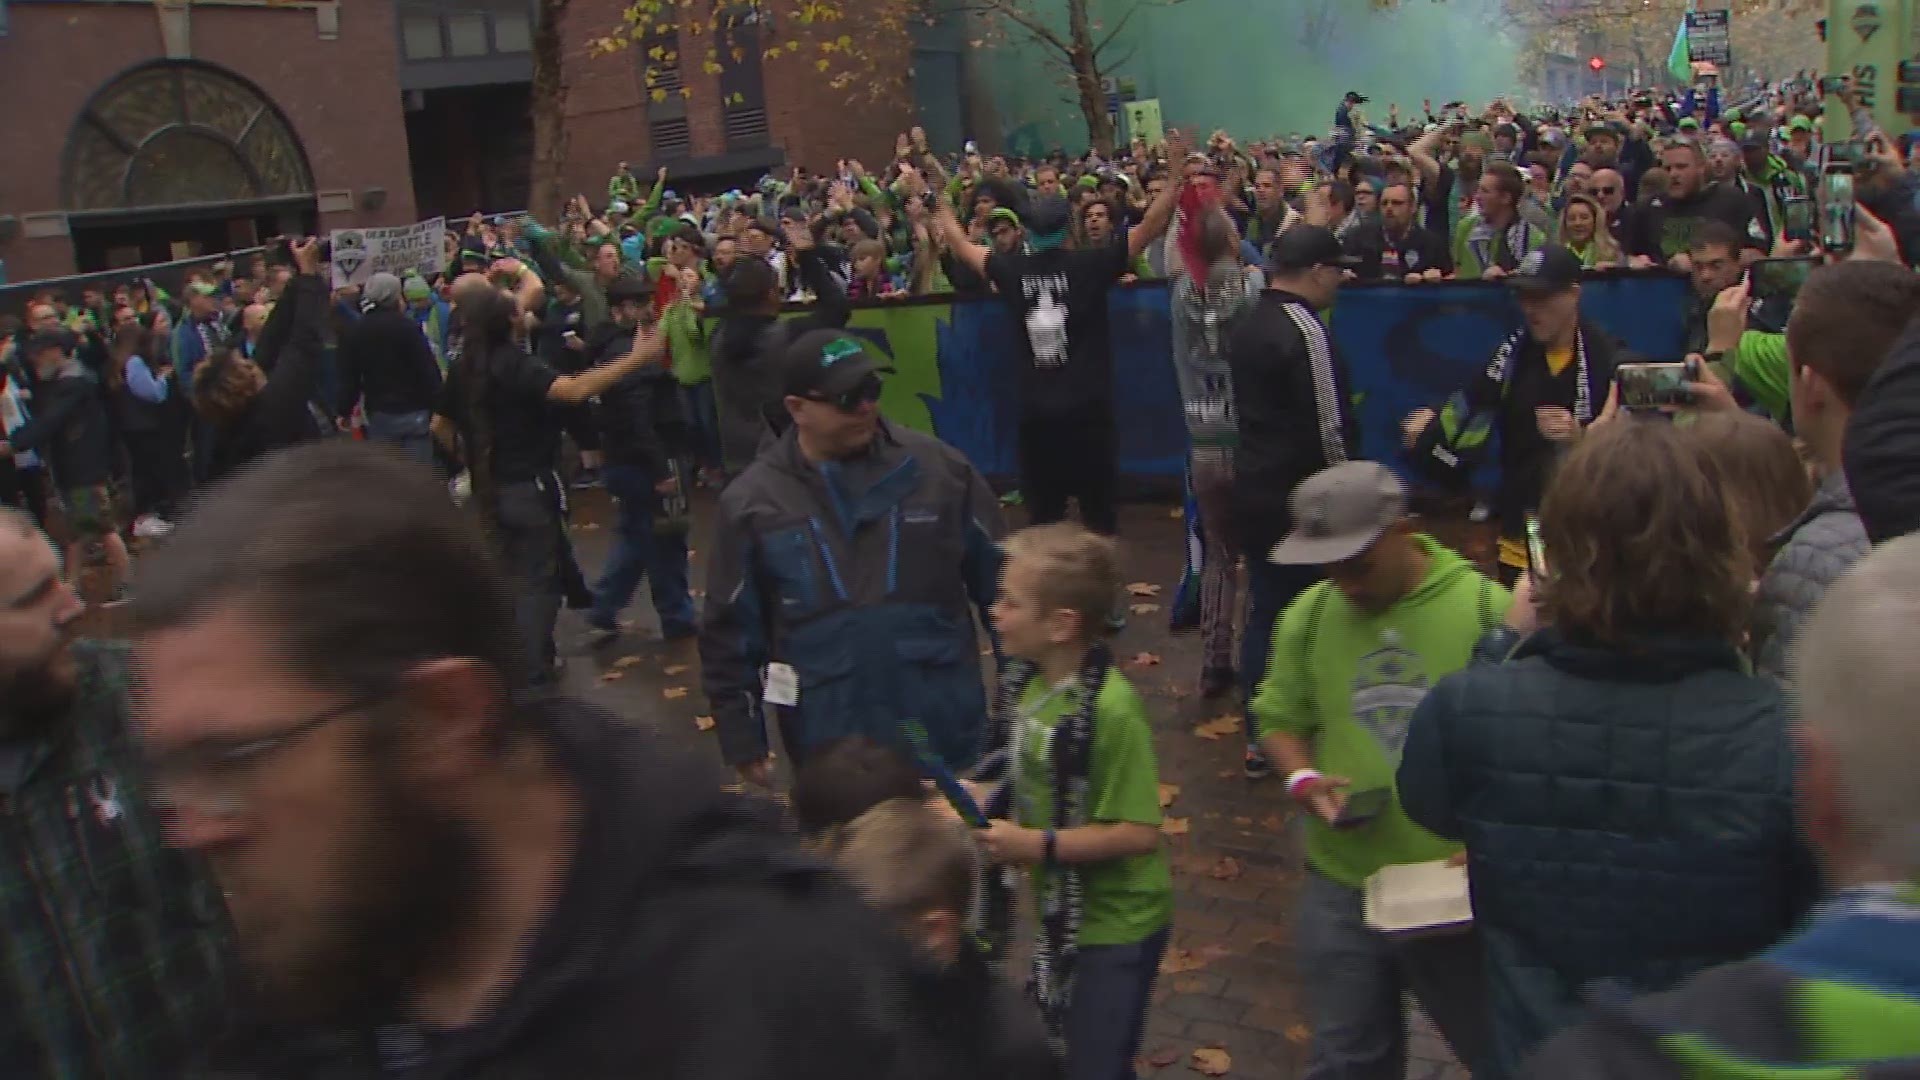 Sounders FC fans gathered in Pioneer Square and then marched to CenturyLink Field for the MLS Cup Sunday.